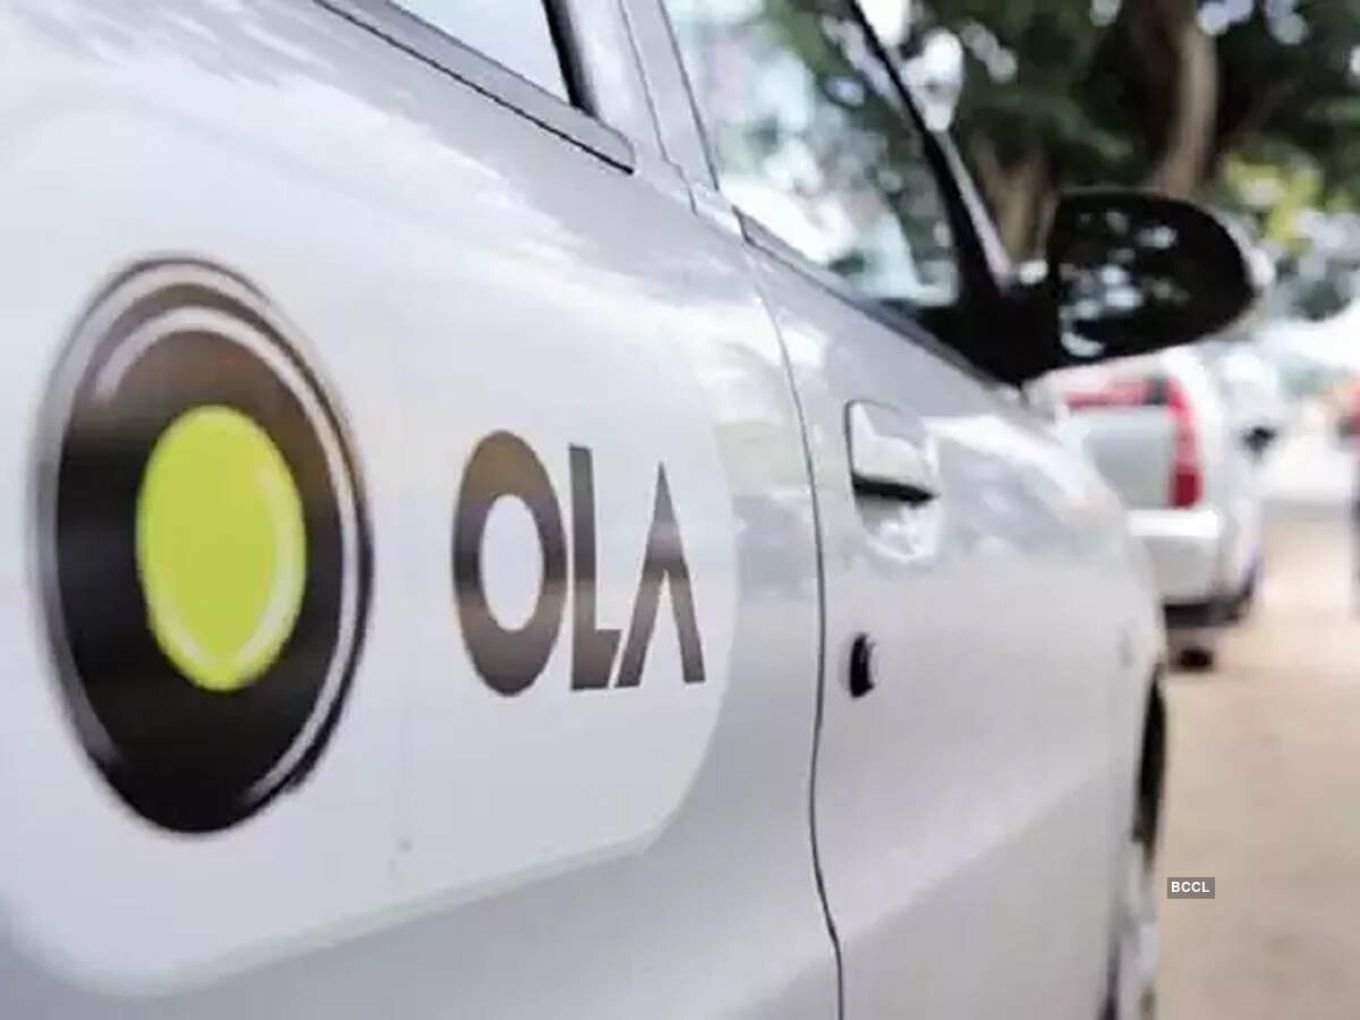 With Restrictions Partially Eased, Ola Plans To Resume Services